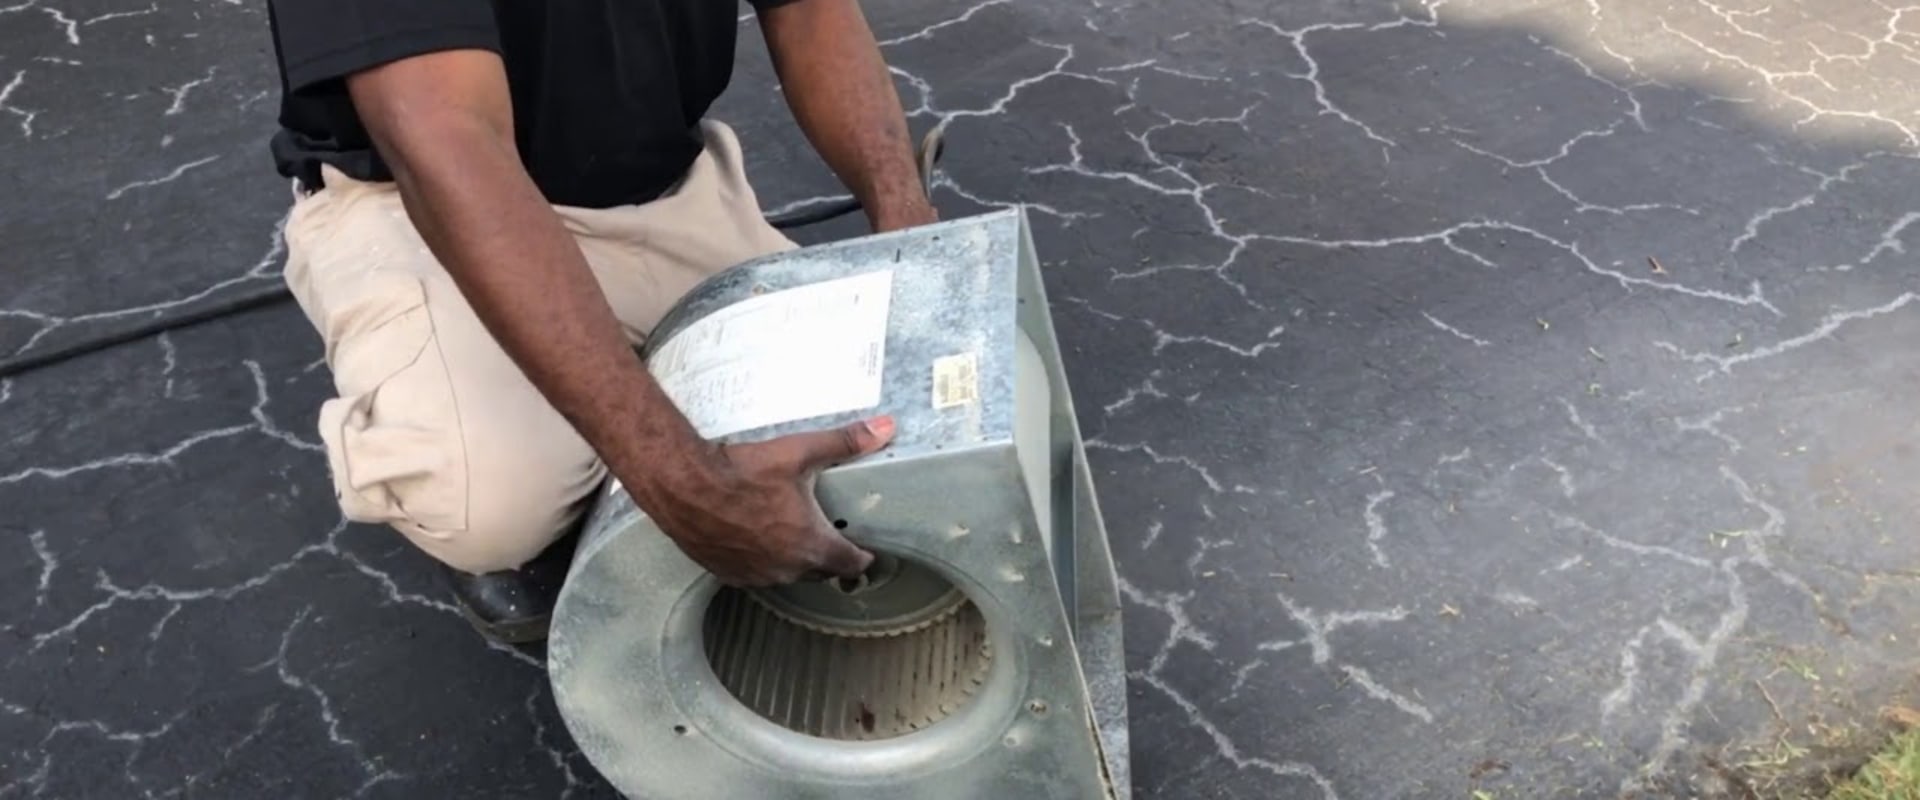 Air Duct Cleaning Services in Davie, FL: What You Need to Know